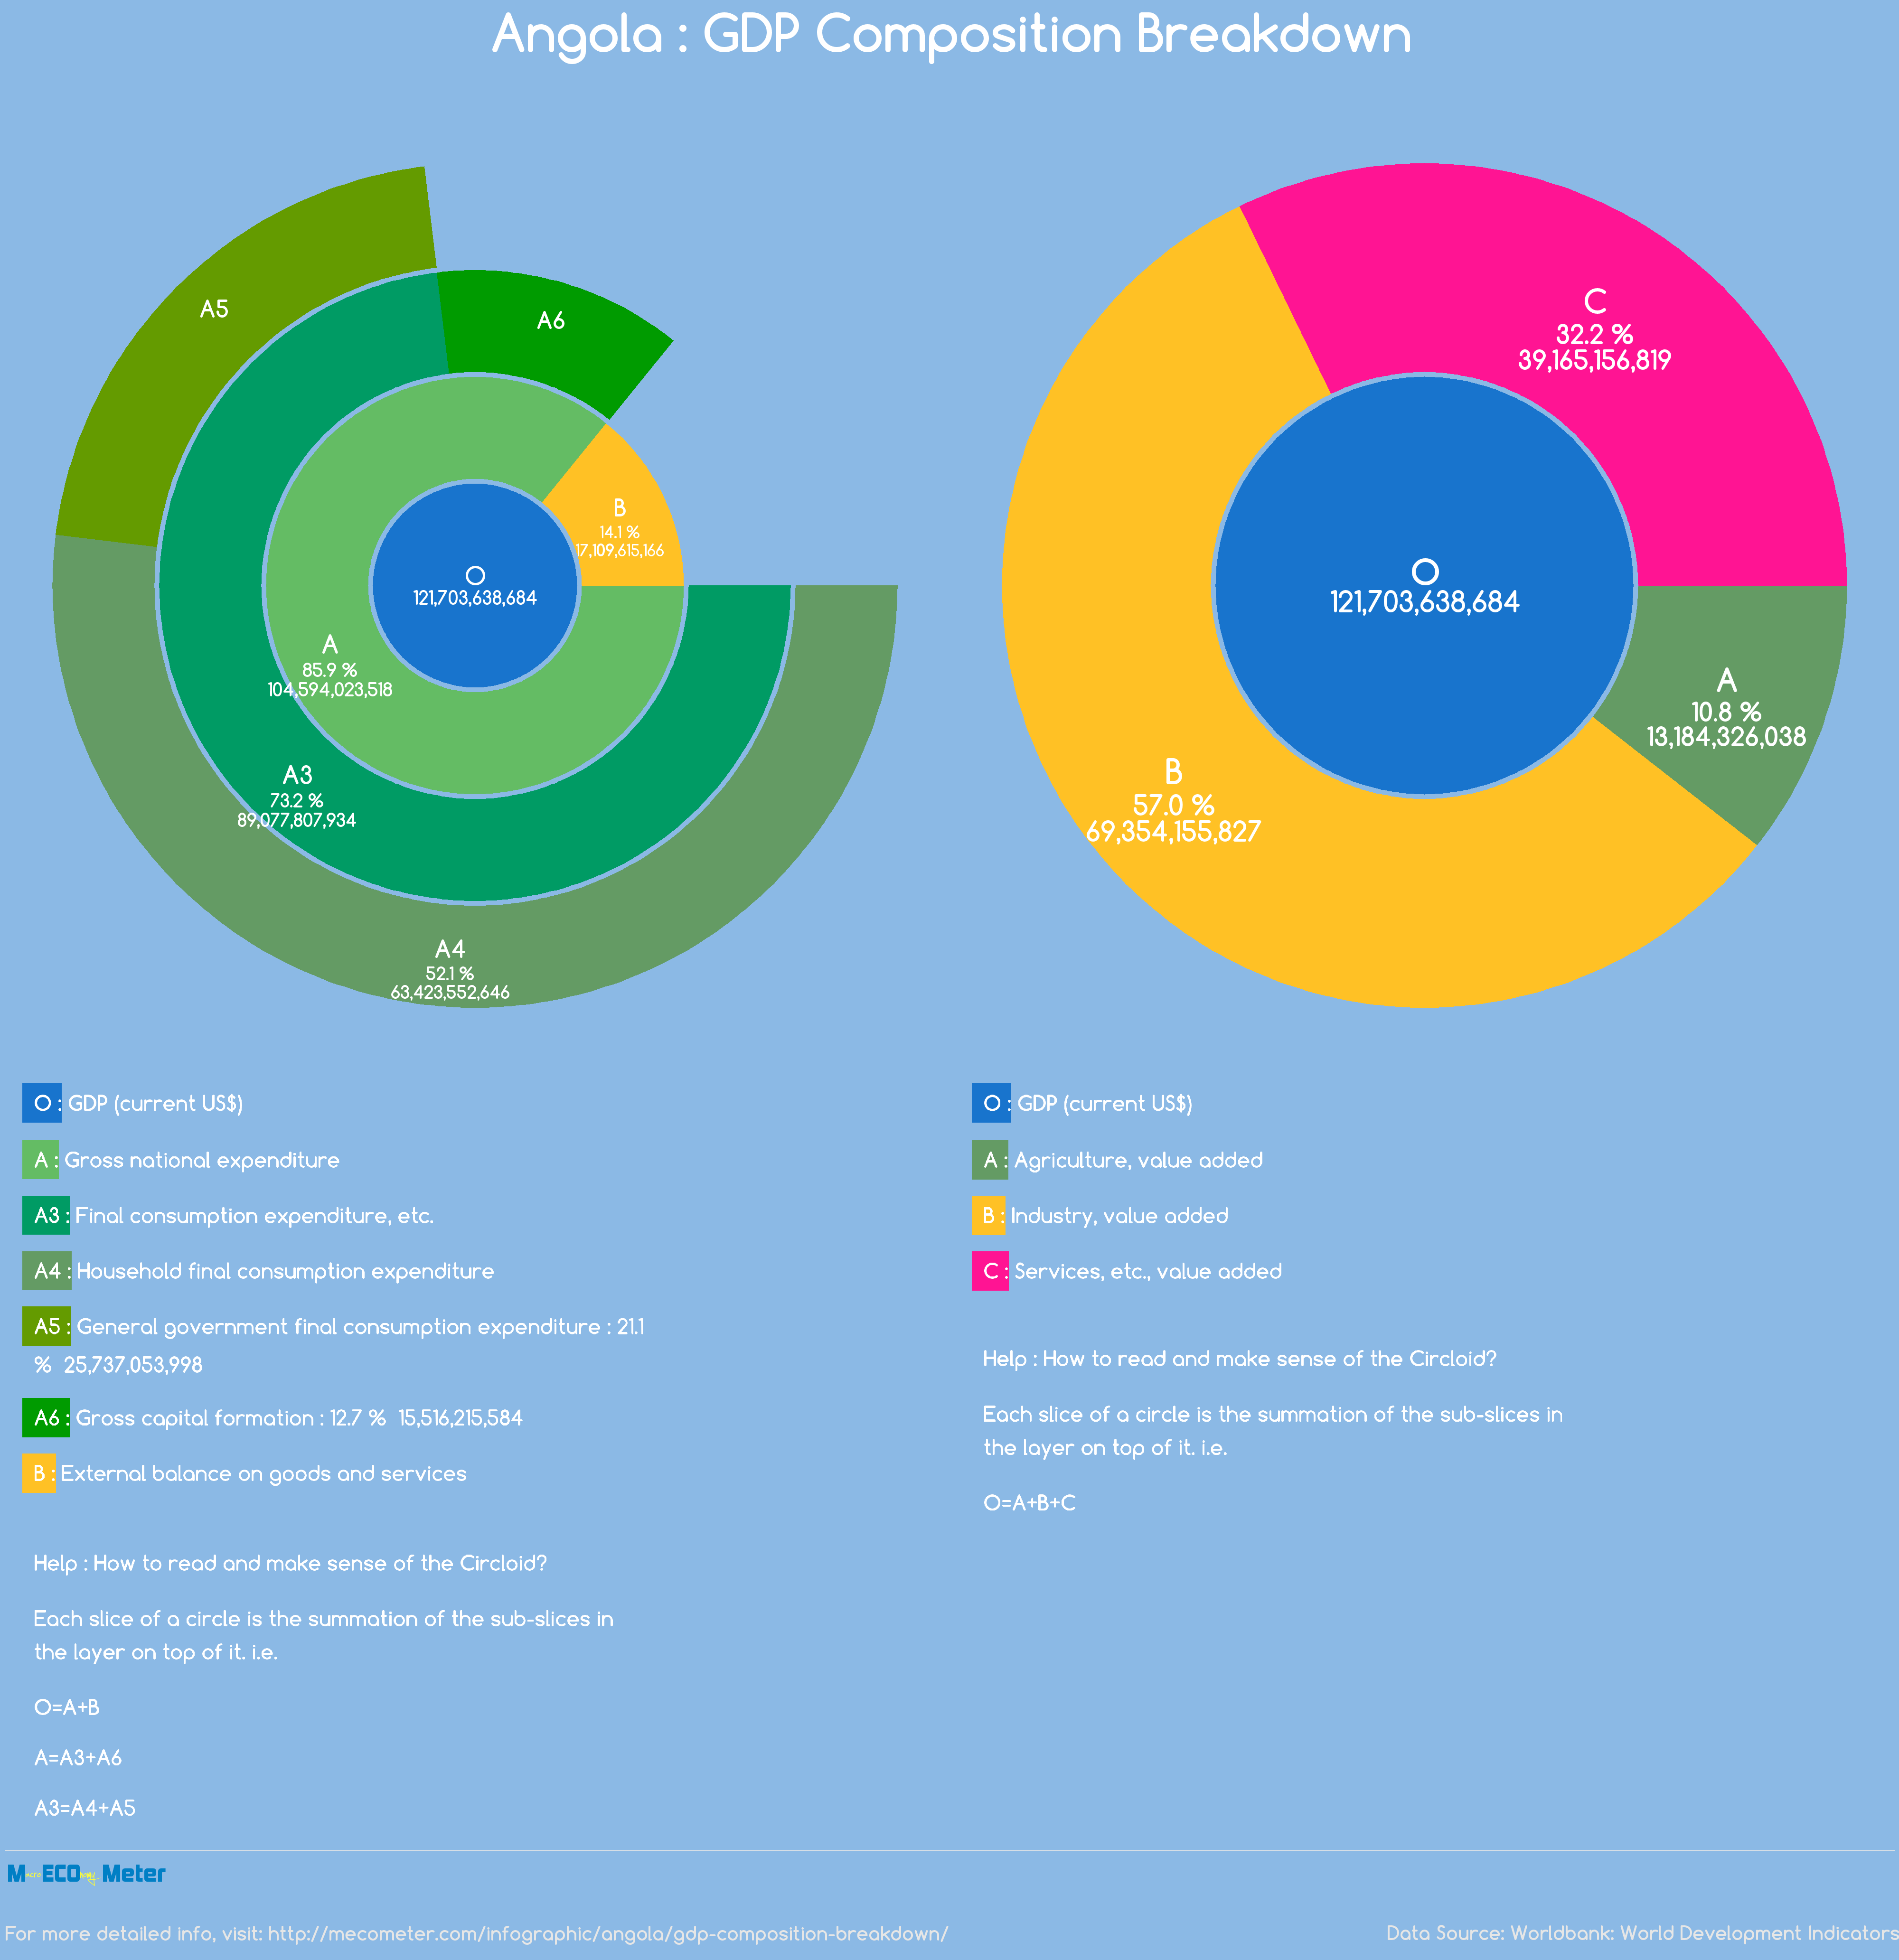 Angola : GDP Composition Breakdown